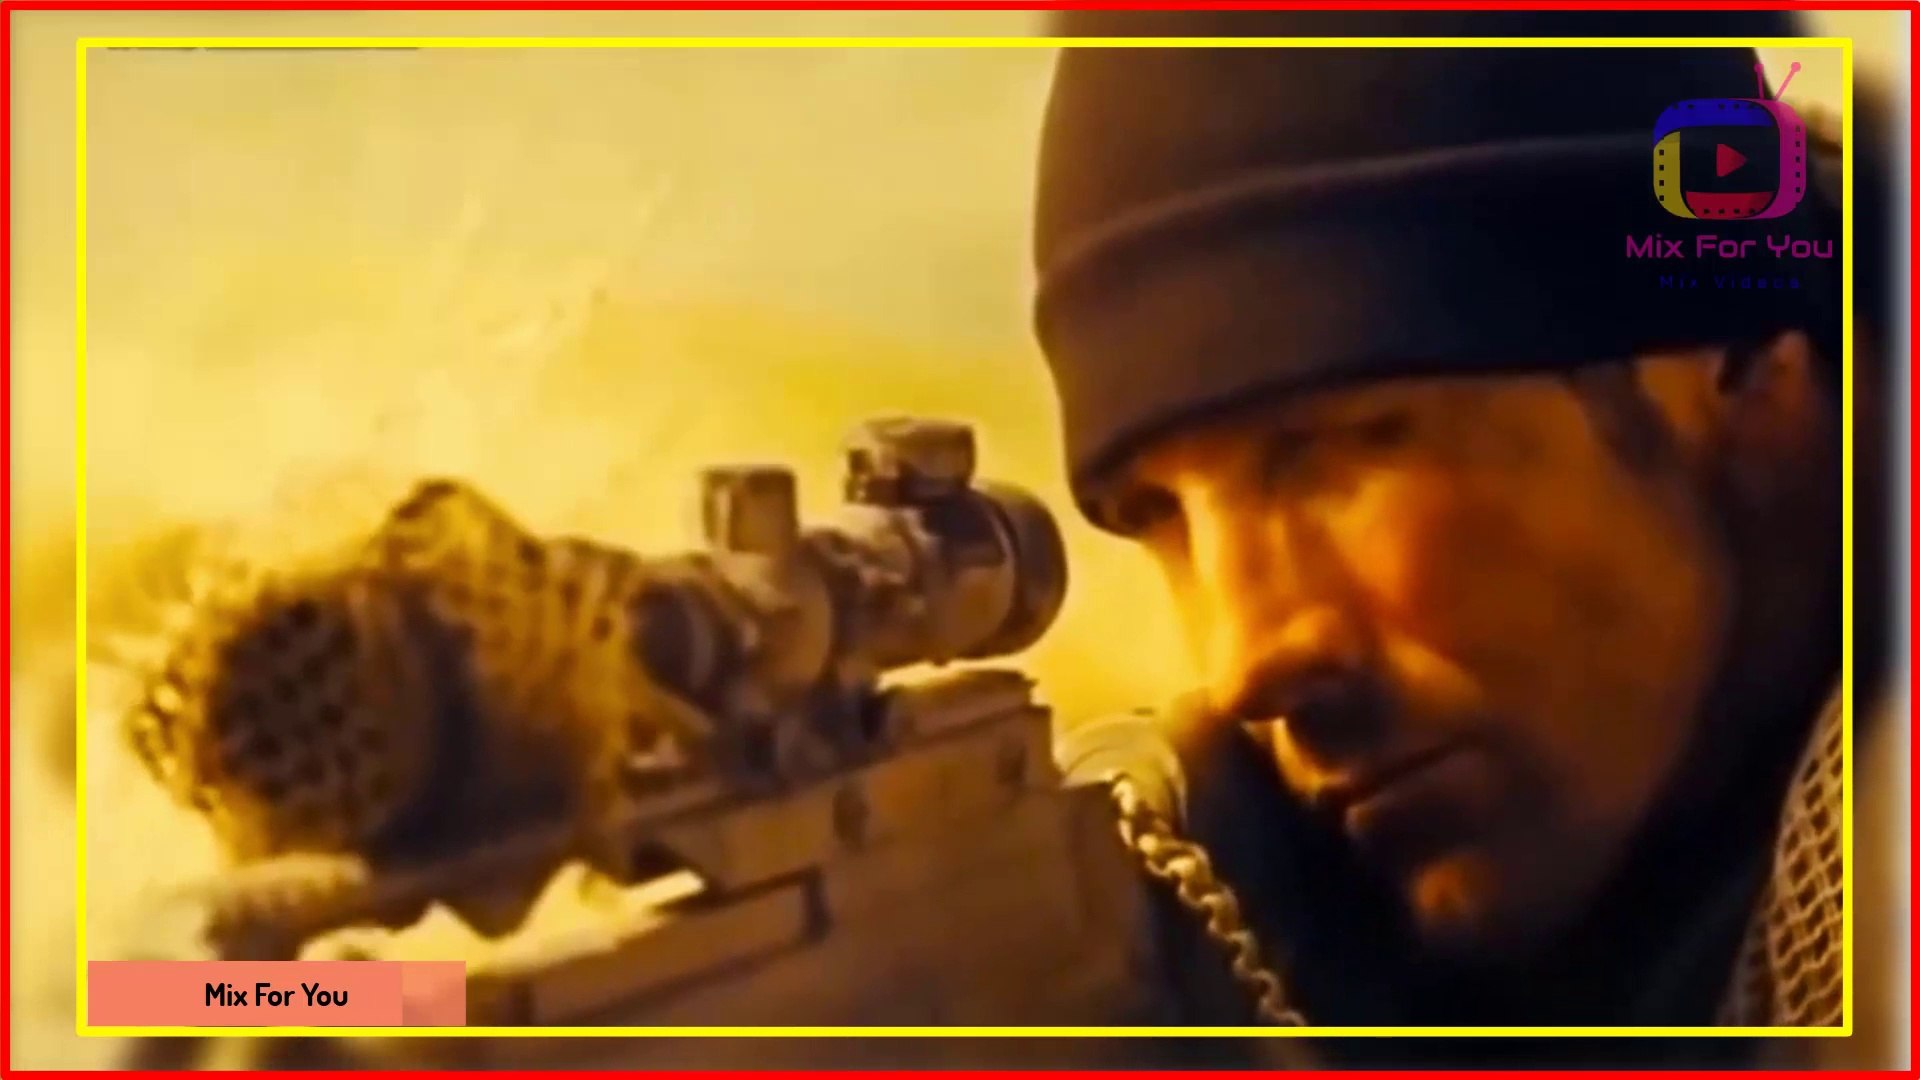 Sniper - Best Action Movie 2022 special for USA full movie english